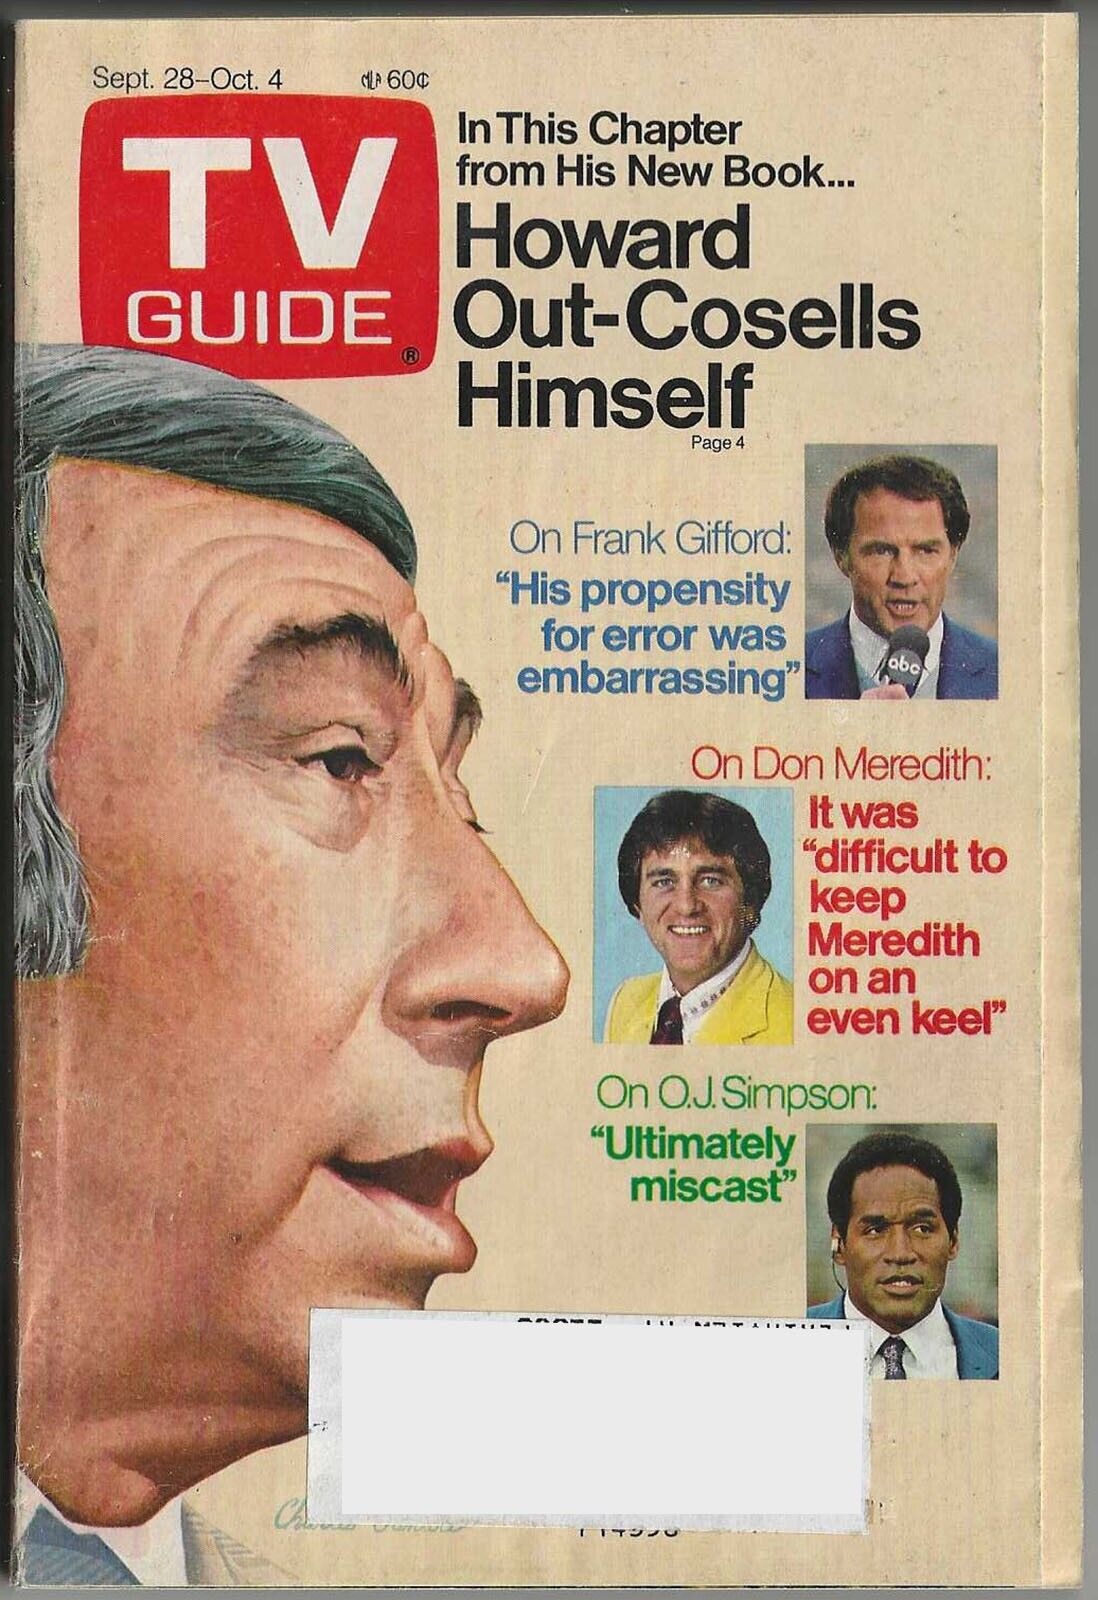 1985 TV Guide Sept 28-Oct 4 Howard Out-Cosells Himself NY Metro Edition